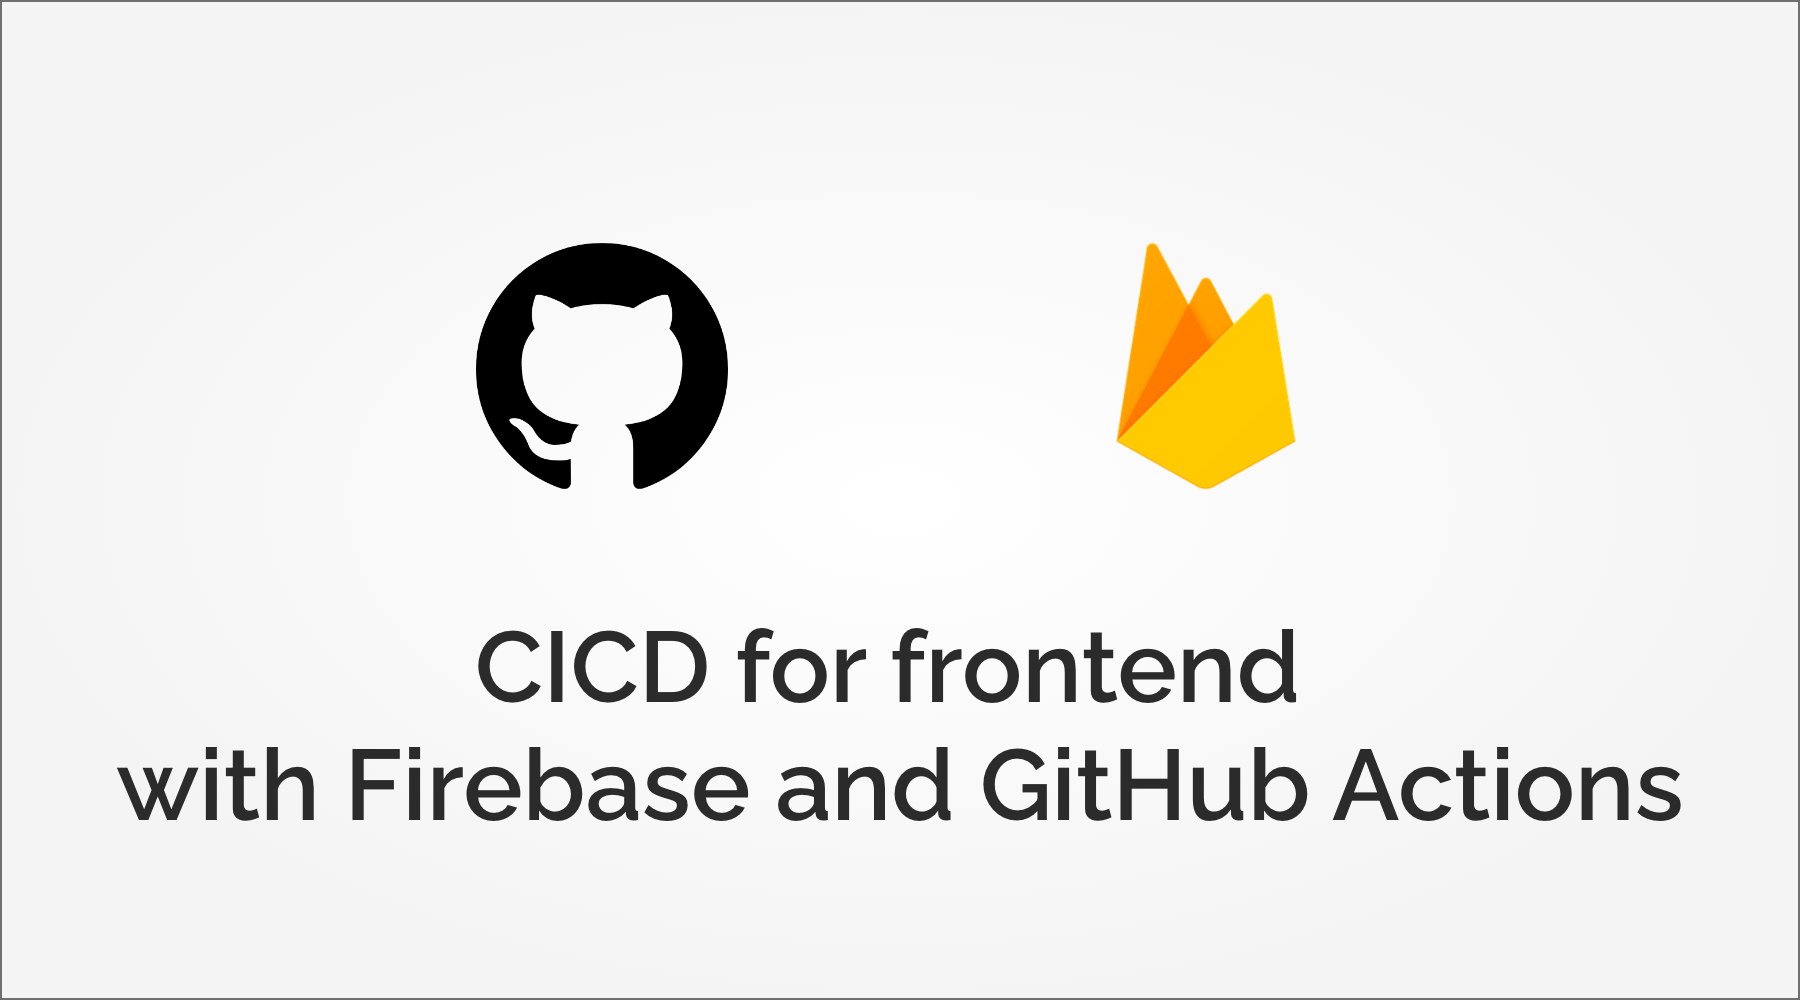 CICD for frontend with Firebase and GitHub Actions